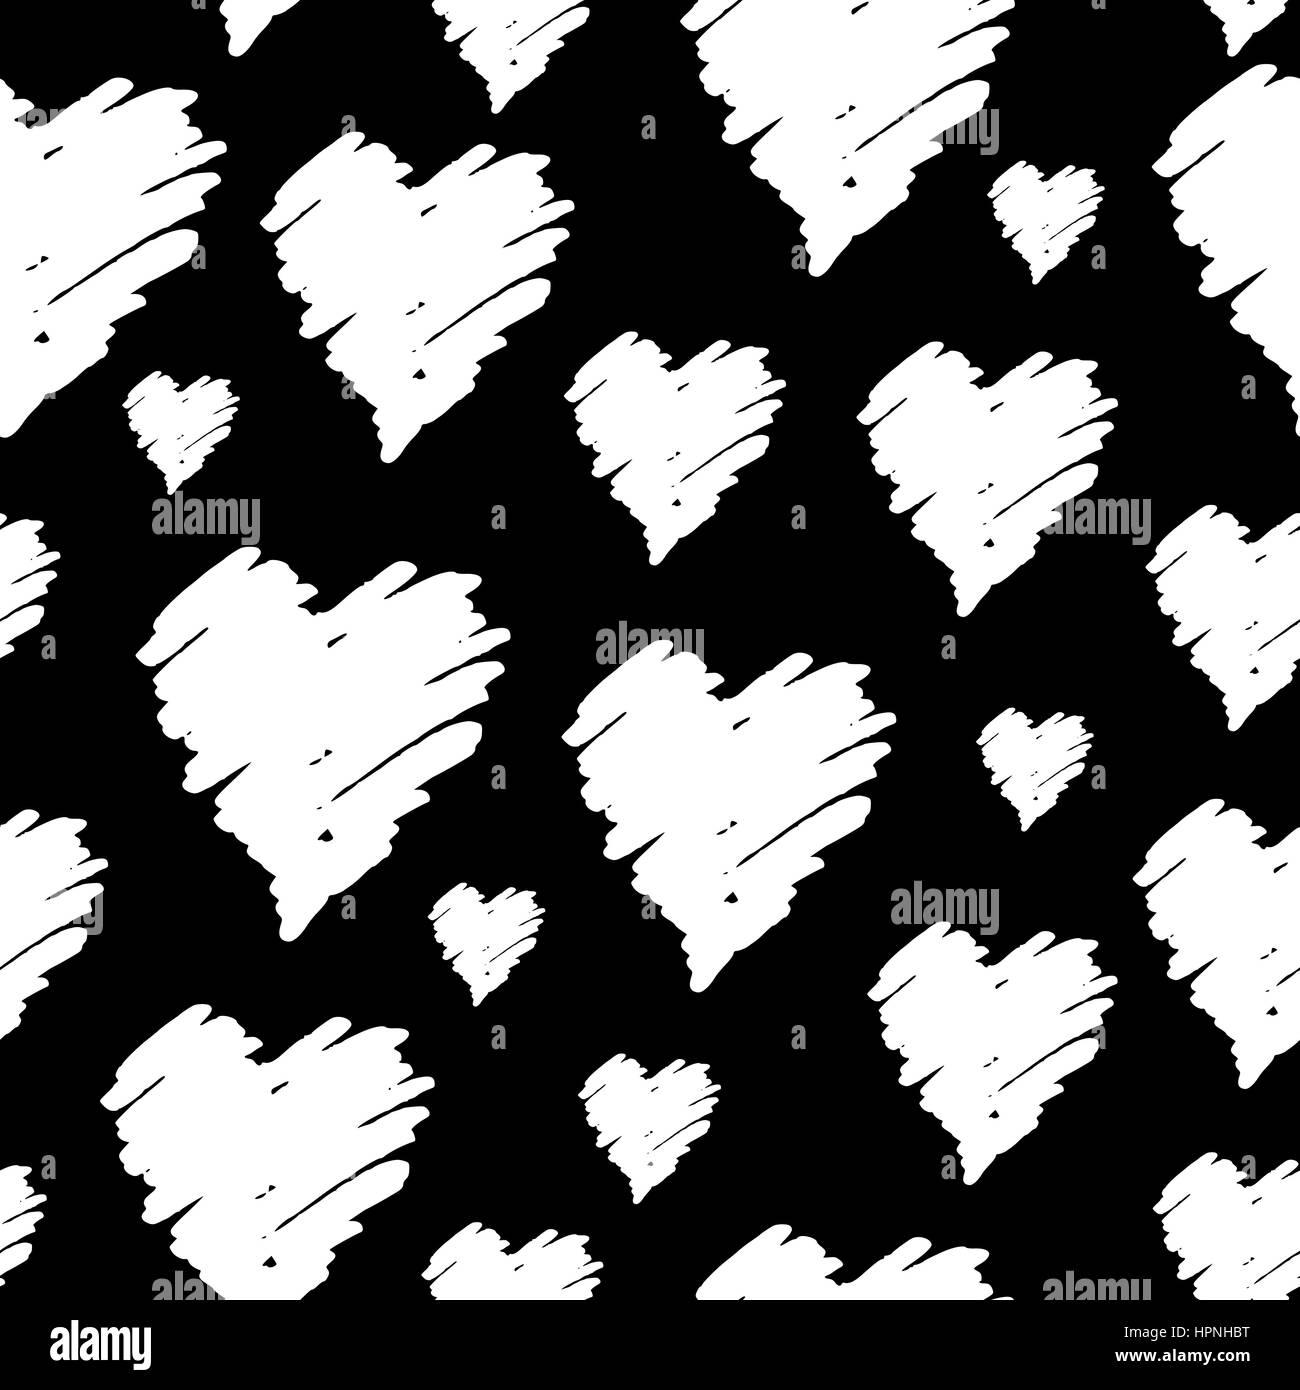 Hand drawn seamless repeating pattern with hearts in black and white. Modern and stylish romantic design poster, wrapping paper, Valentine card design Stock Vector